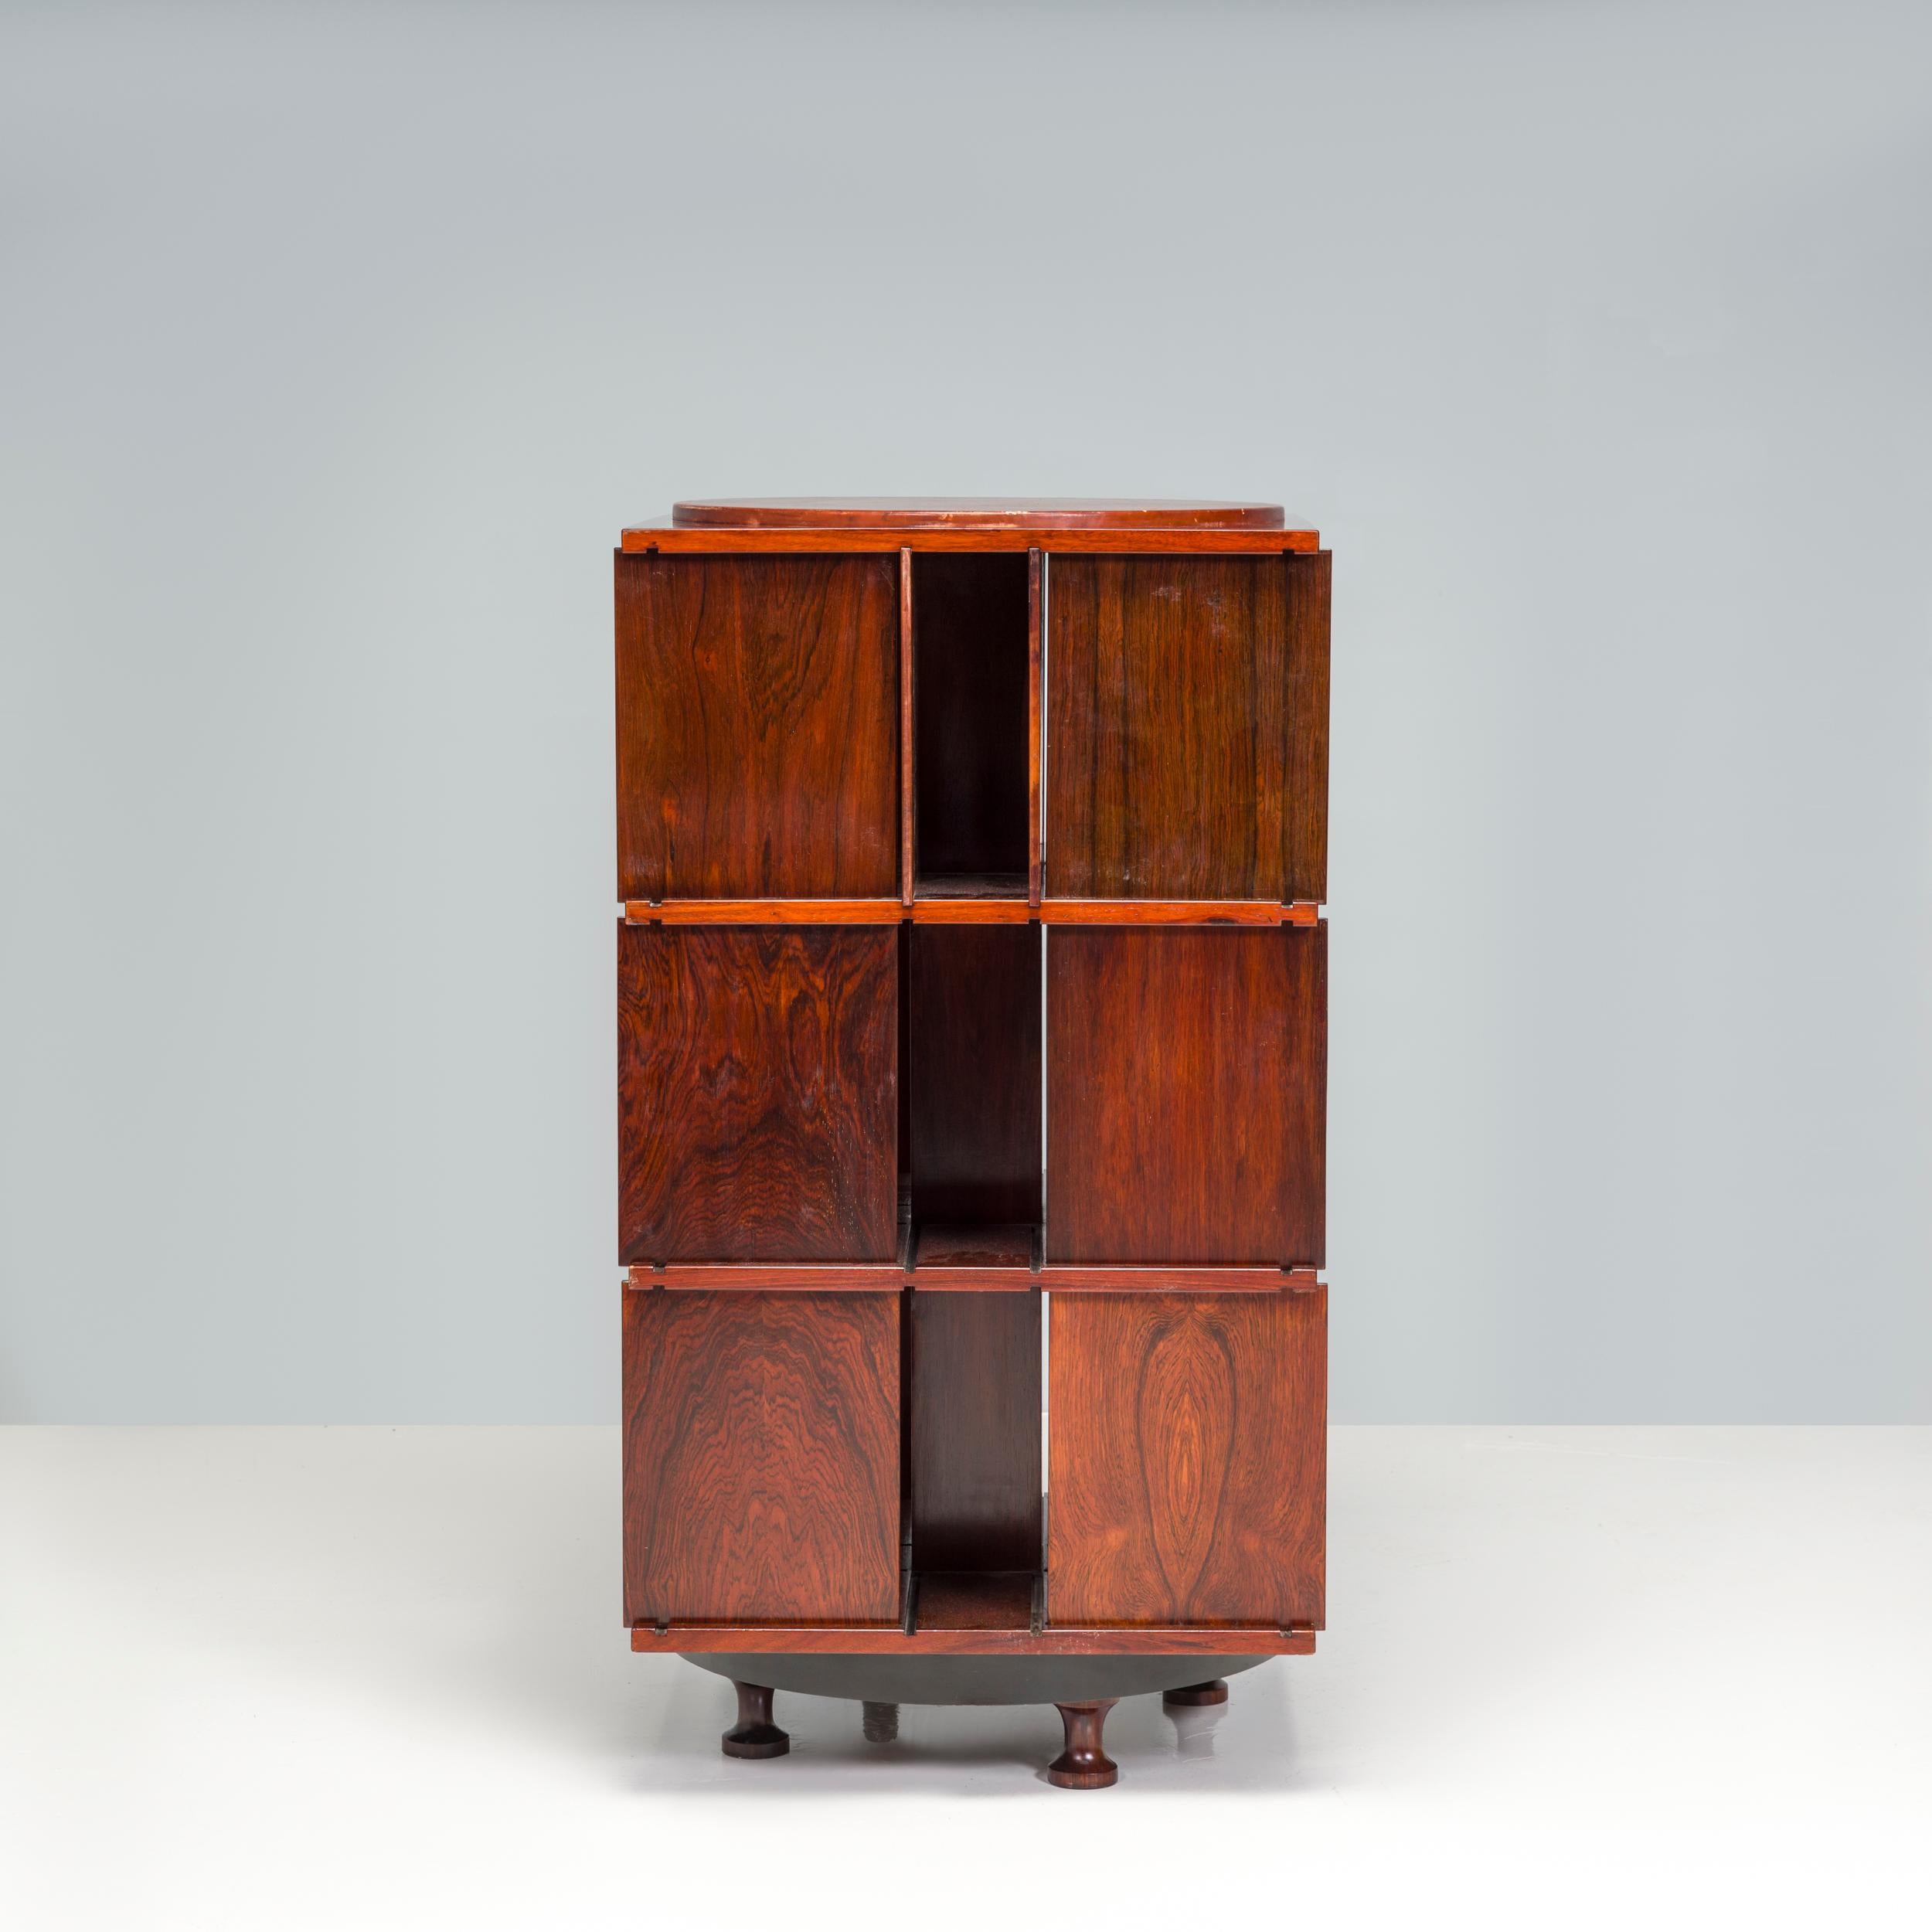 Originally designed in 1963 by Gianfranco Frattini, the Modello 823 bookshelf was manufactured by Bernini. After going out of production Poltrona Frau re-issued the design in 2022 under a new name.

The bookshelf, constructed from Rio Rosewood, is a